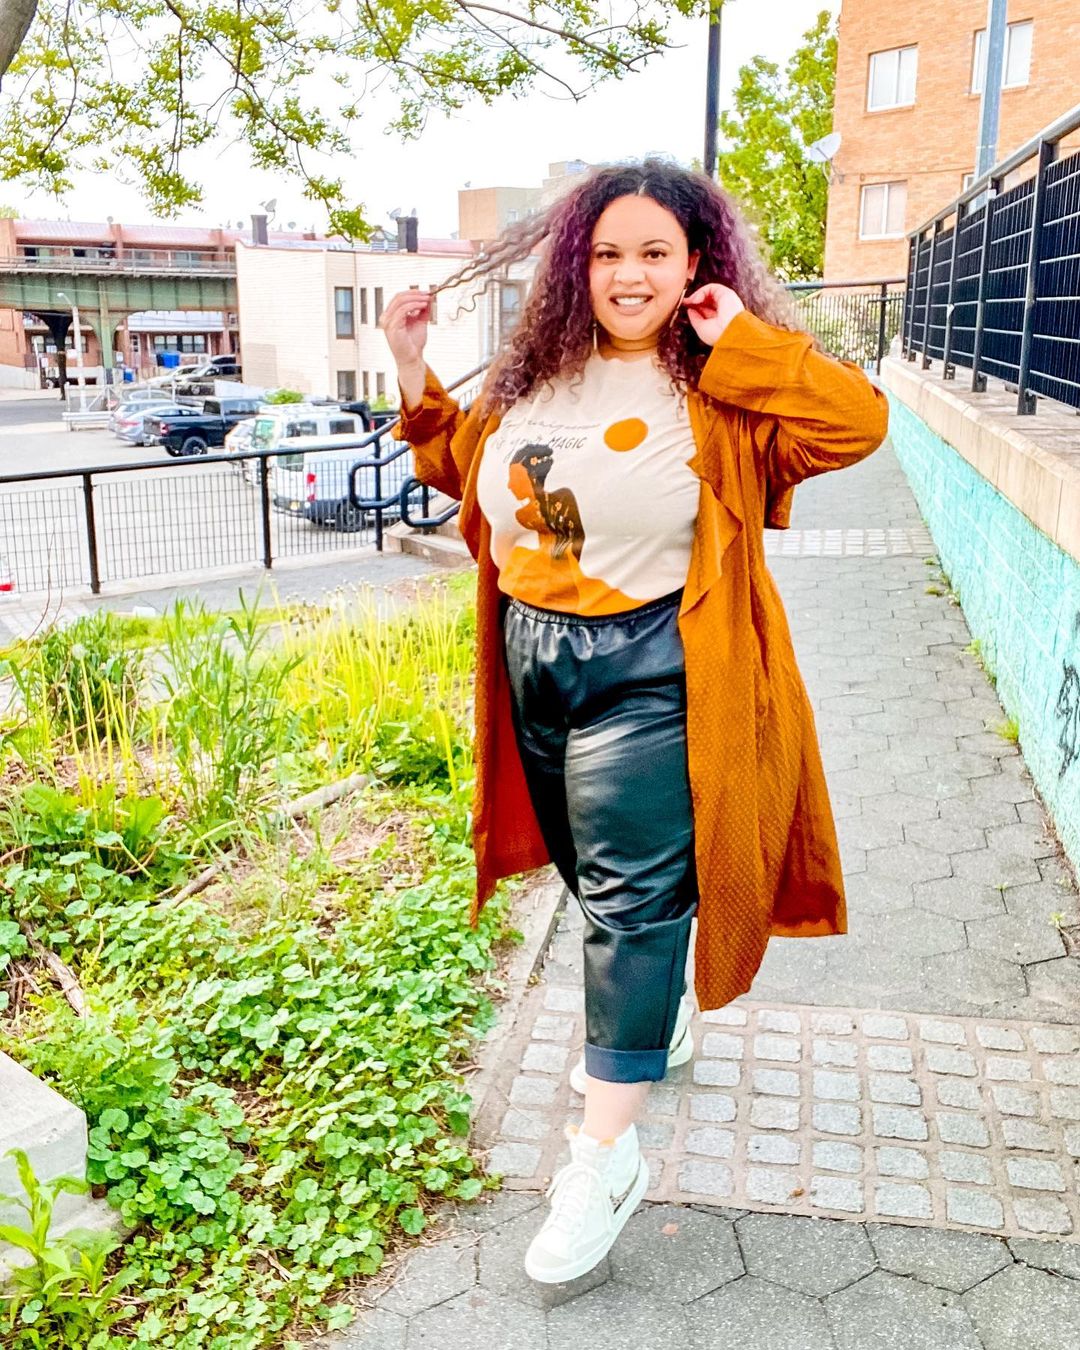 15 Winter Outfit Ideas For Curvy Girls - Kayla's Chaos